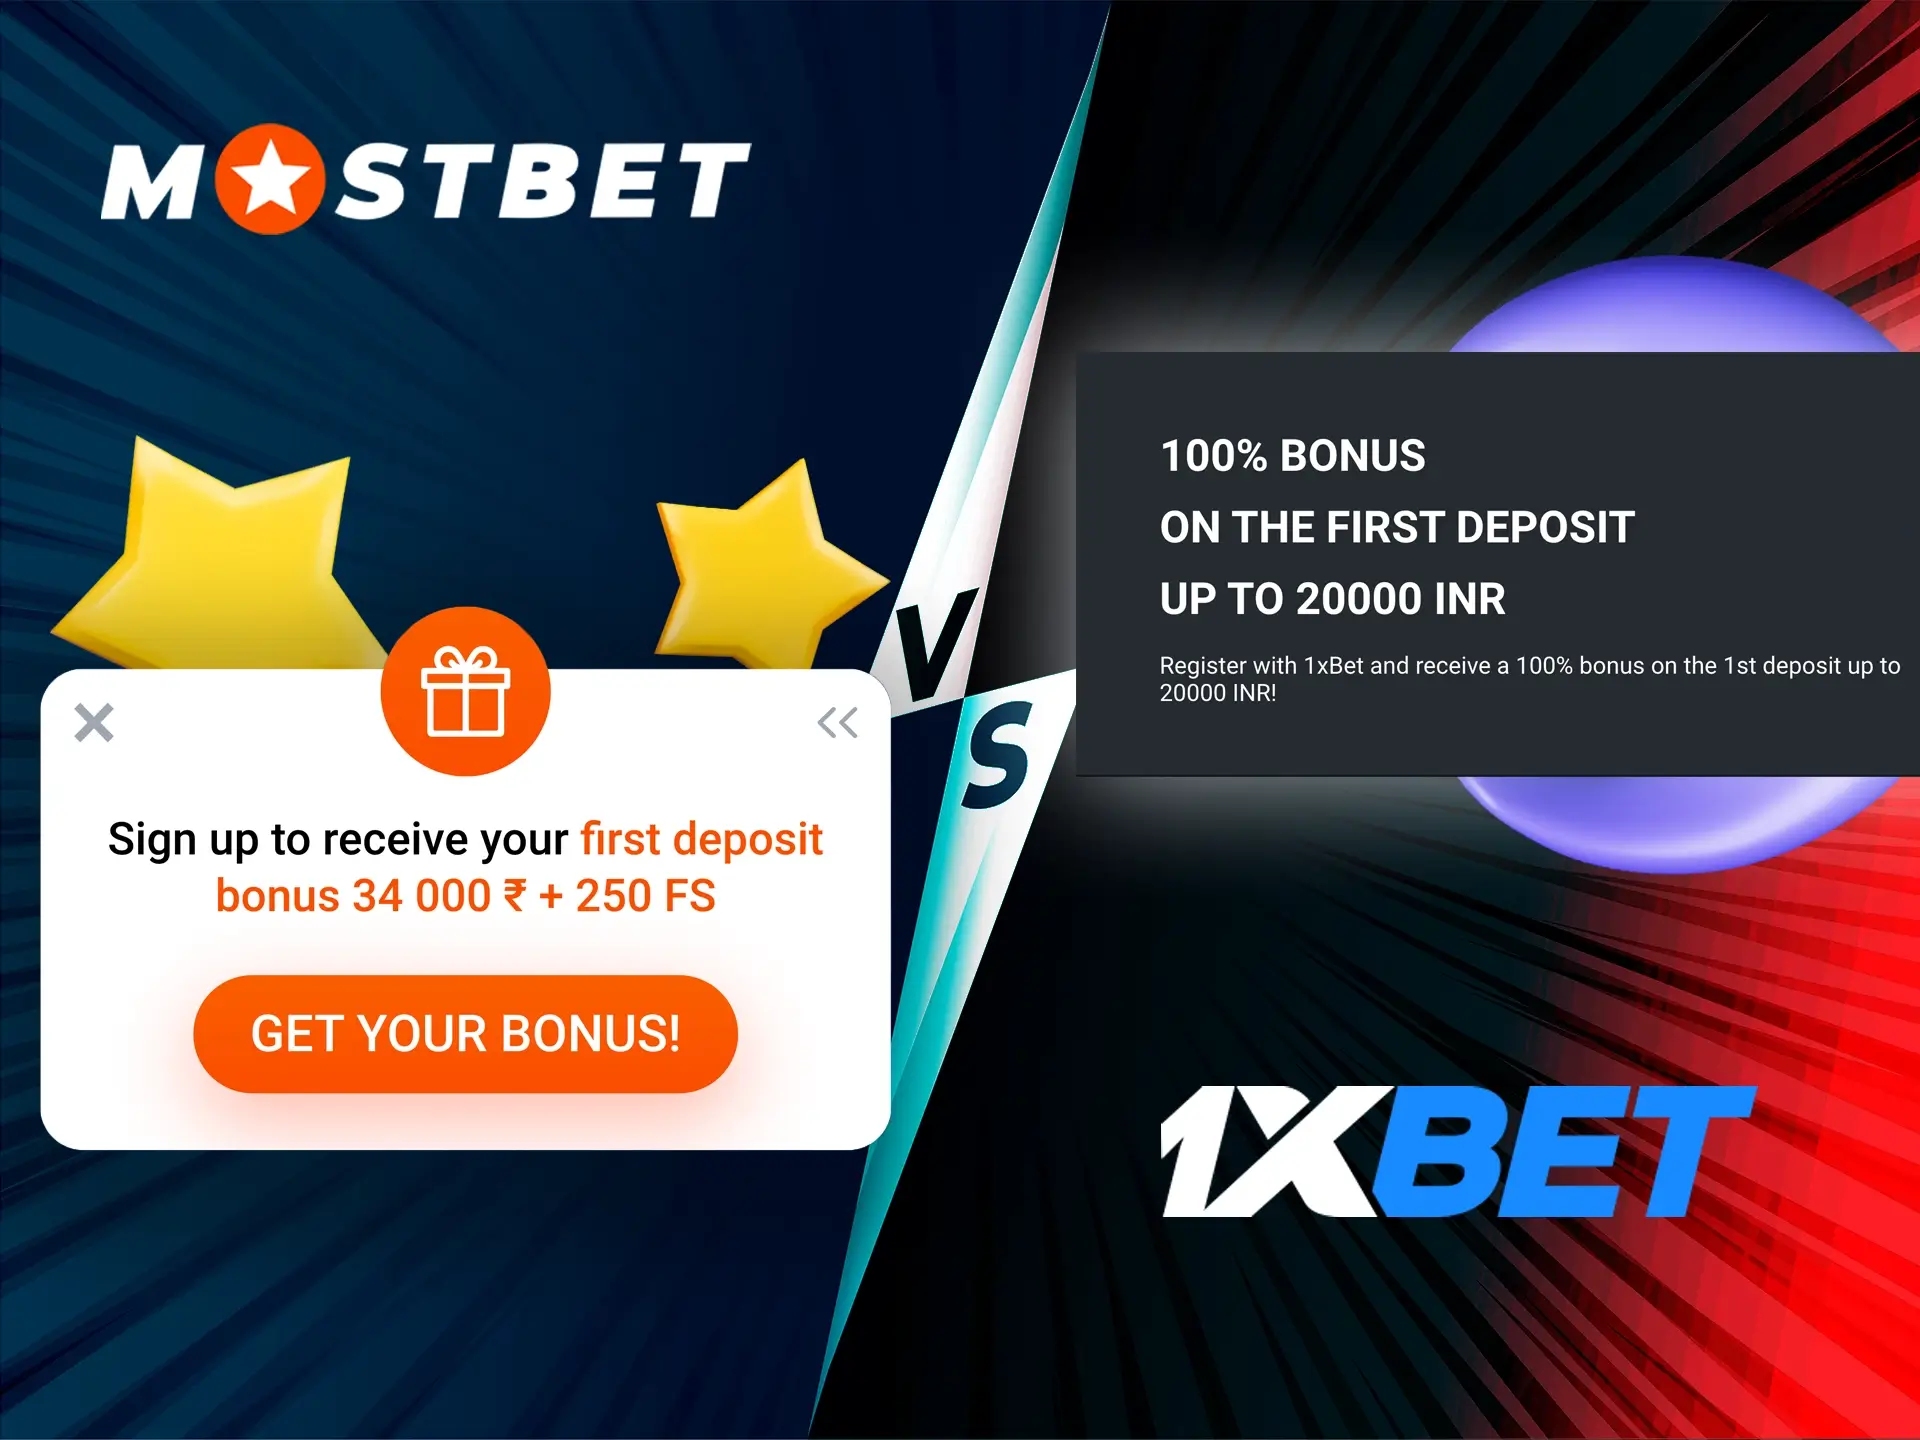 Choose which bonus suits you best Mostbet or 1xbet.